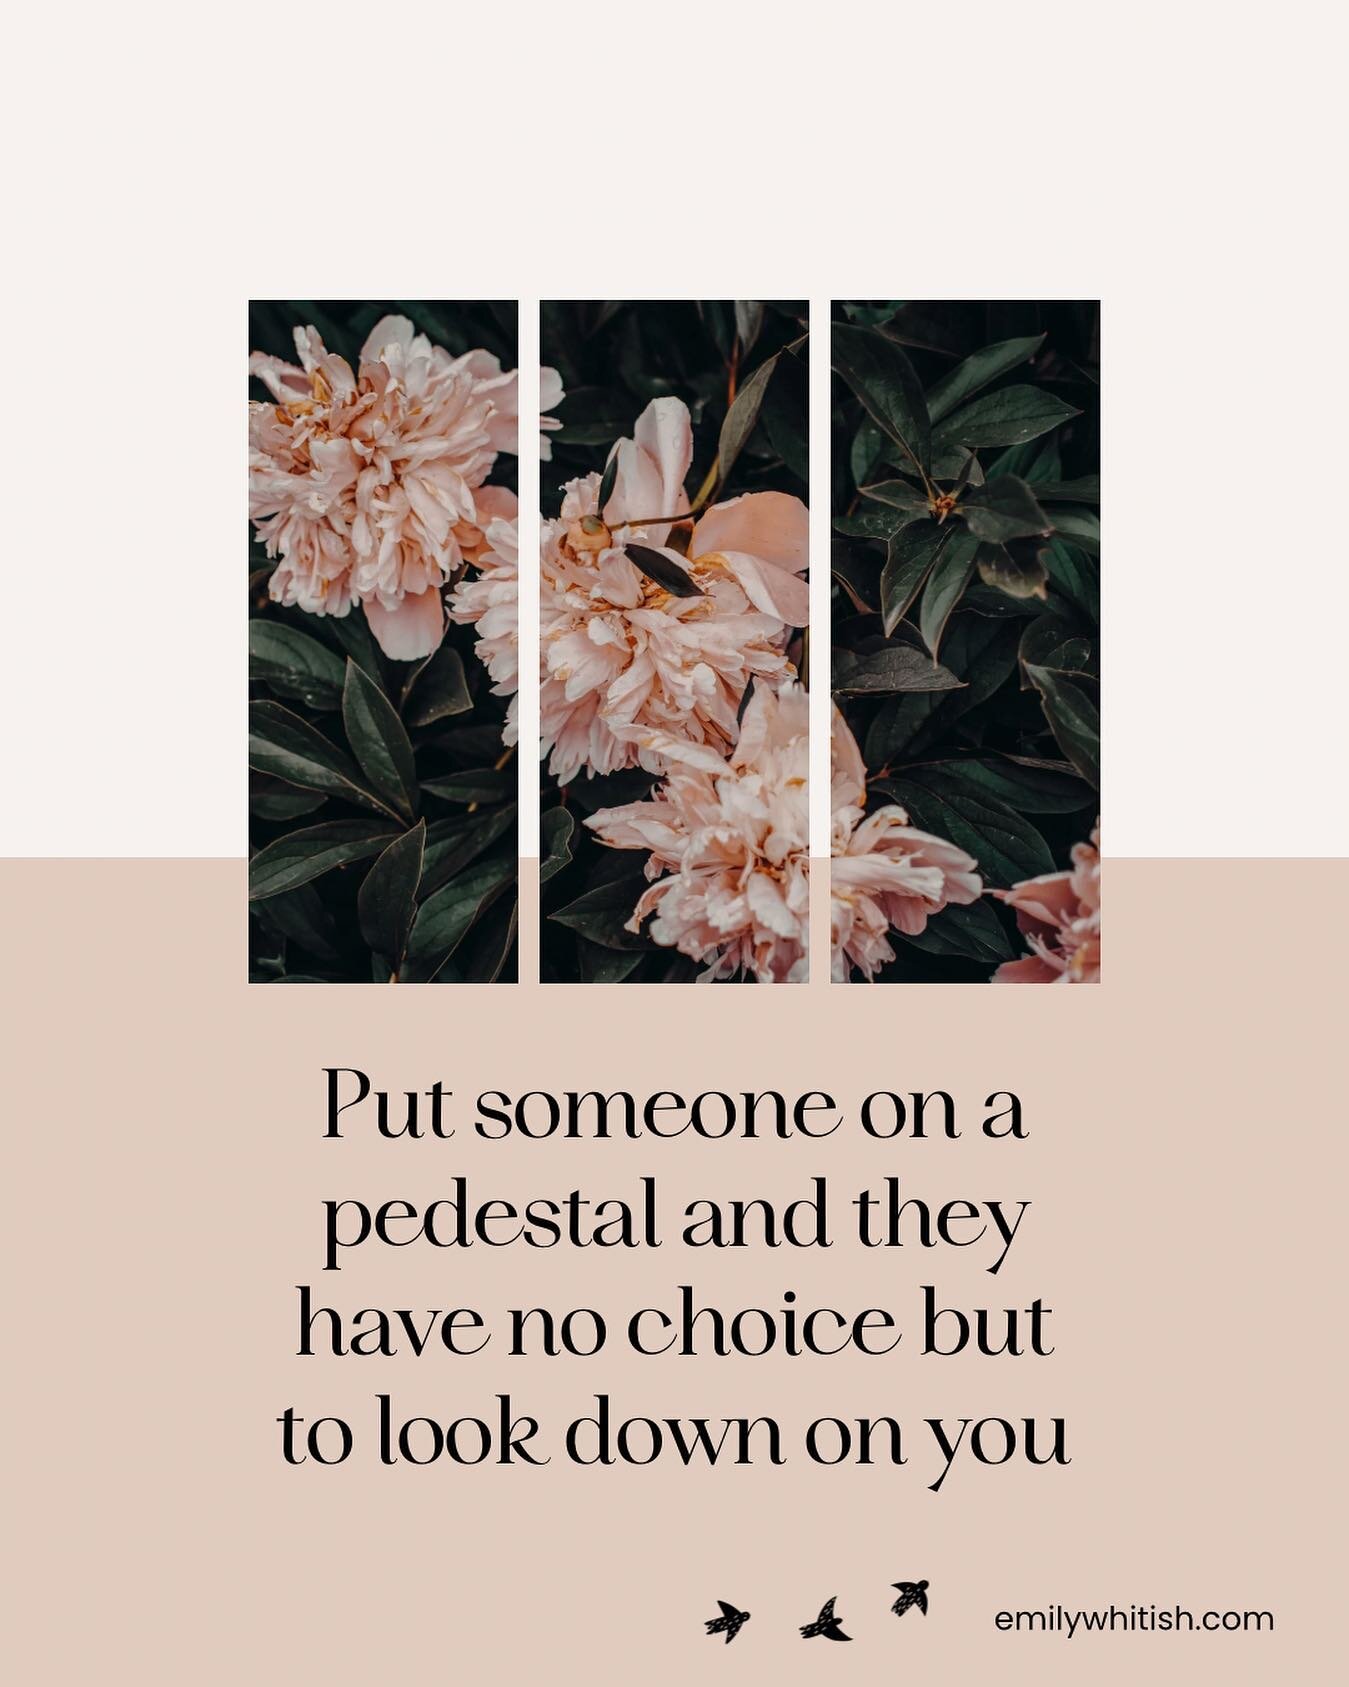 We usually end up with our equals; those we see at an eye level. When you put people on pedestals, they have no choice but to look down on you to see you.